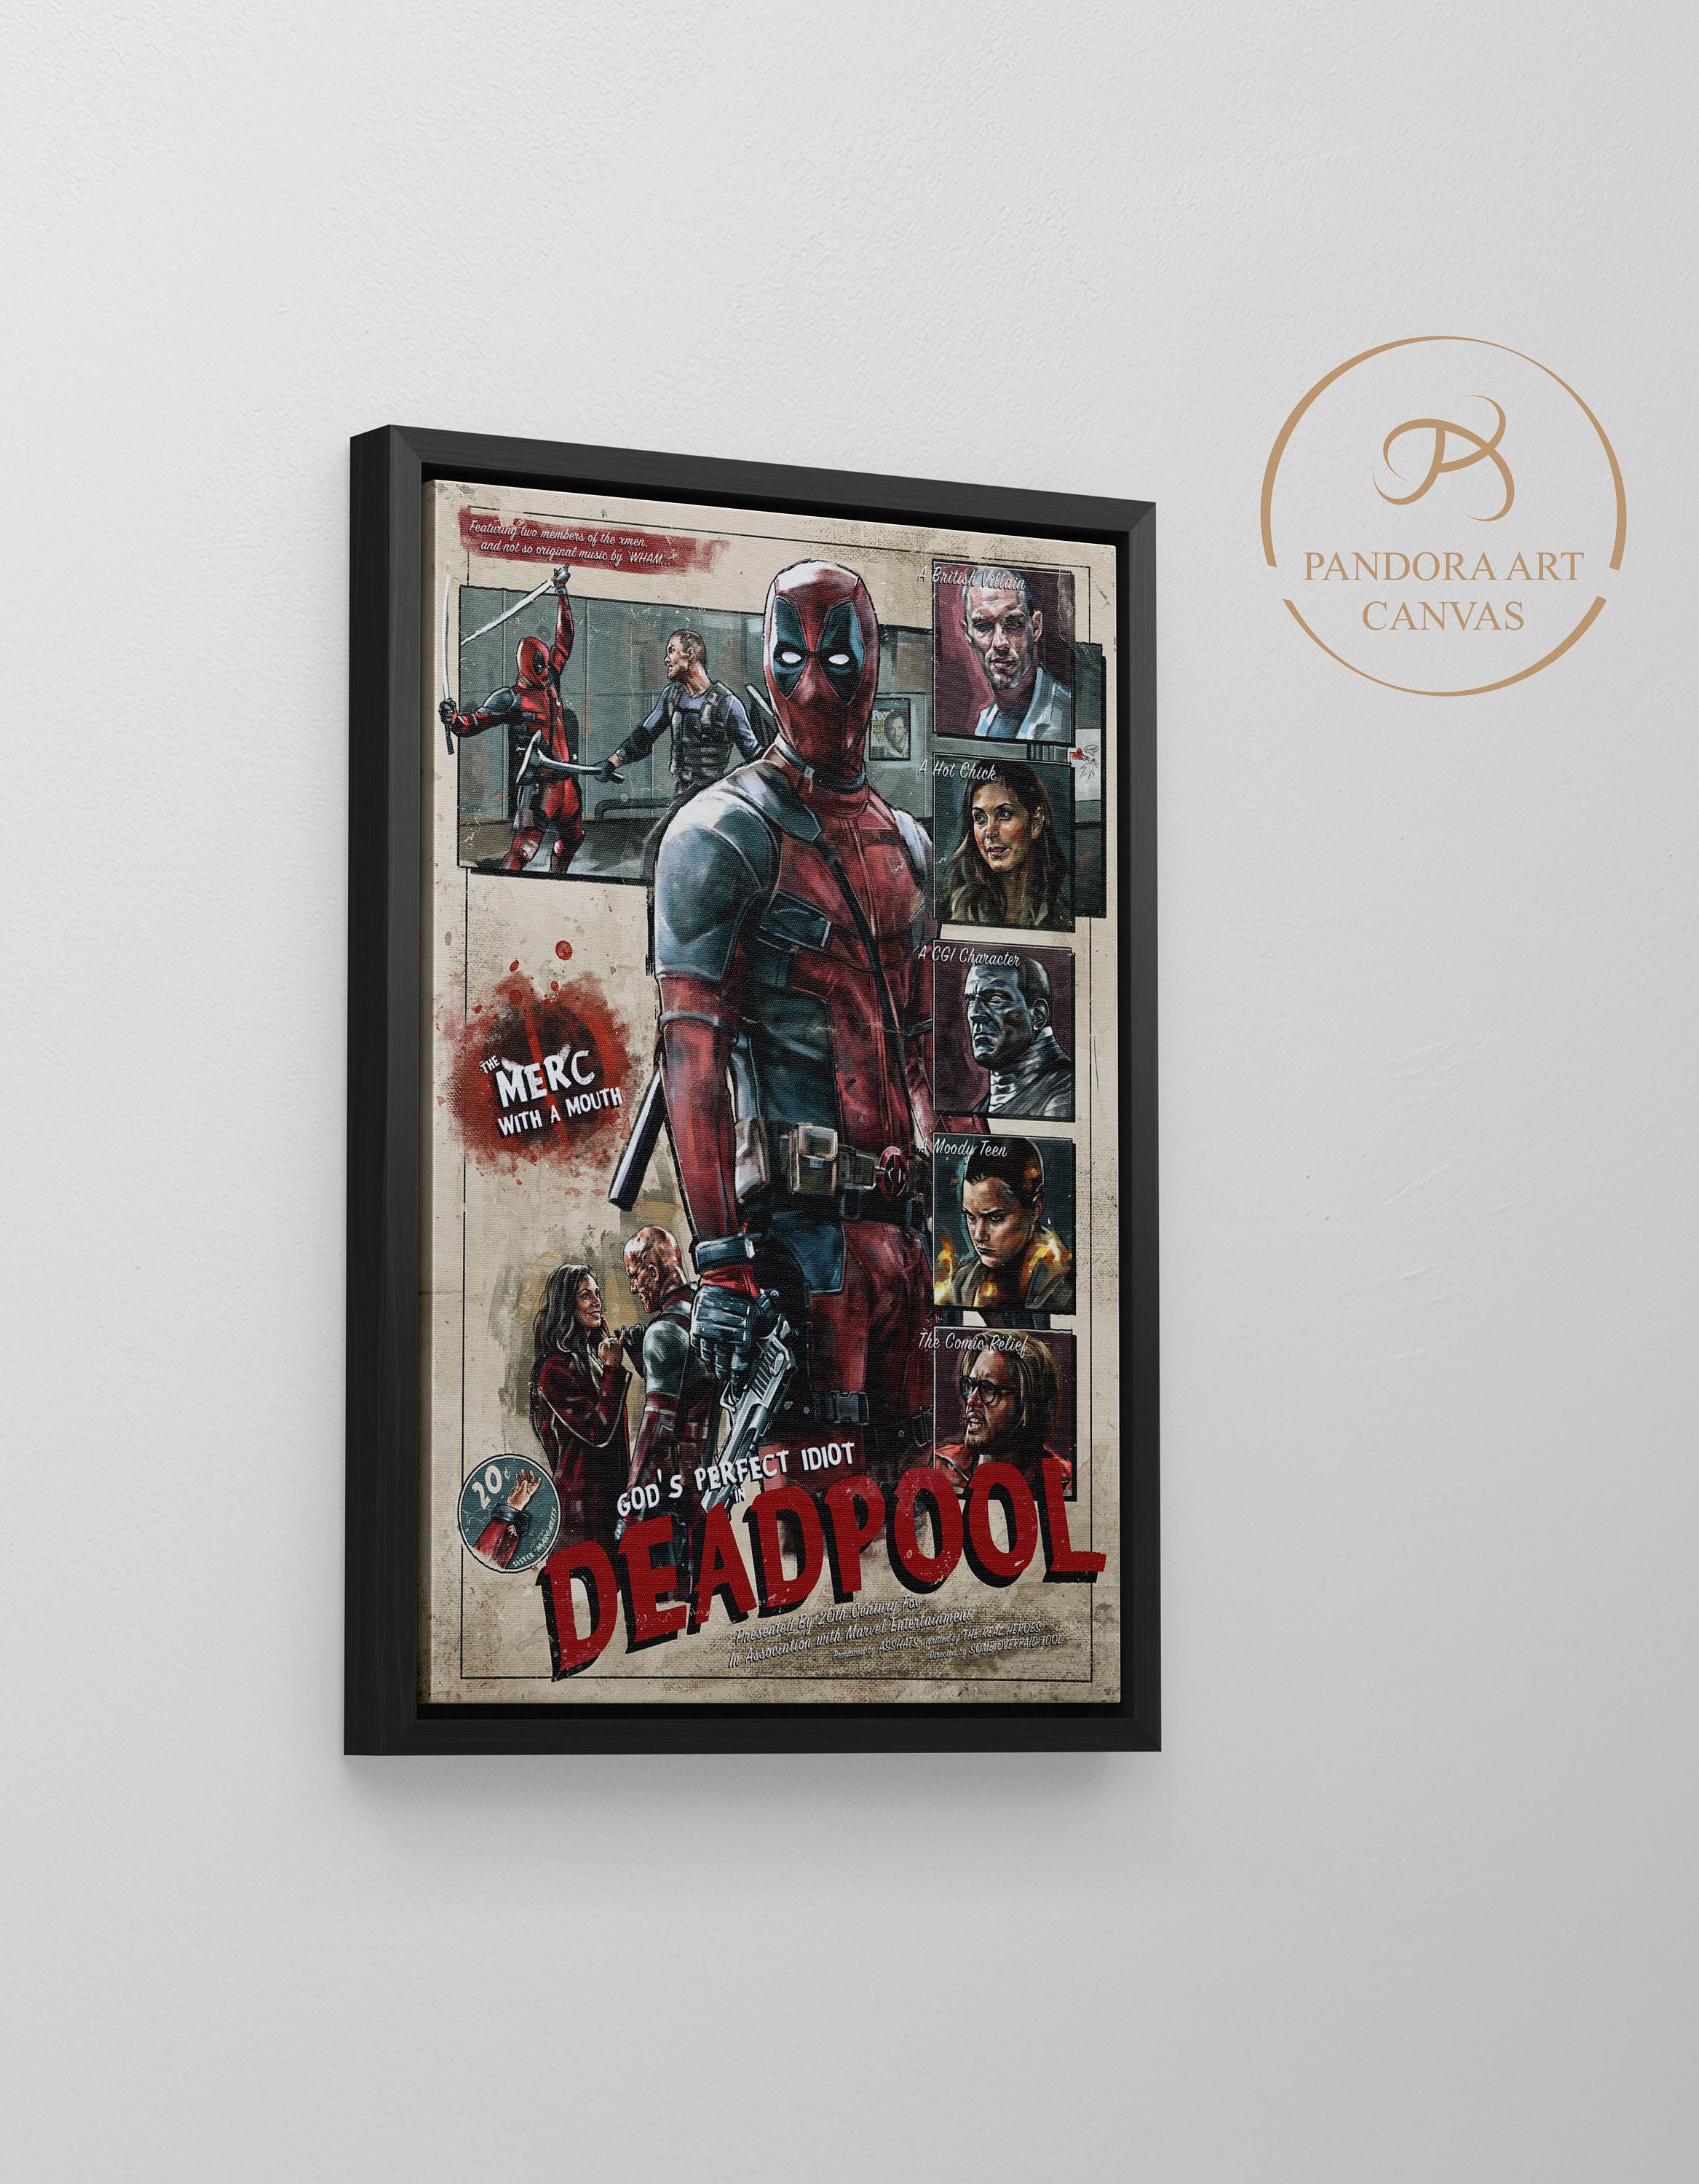 Comics Deadpool Merc With A Mouth Moon Knight HD Wallpaper Background Fine  Art Print - Comics posters in India - Buy art, film, design, movie, music,  nature and educational paintings/wallpapers at